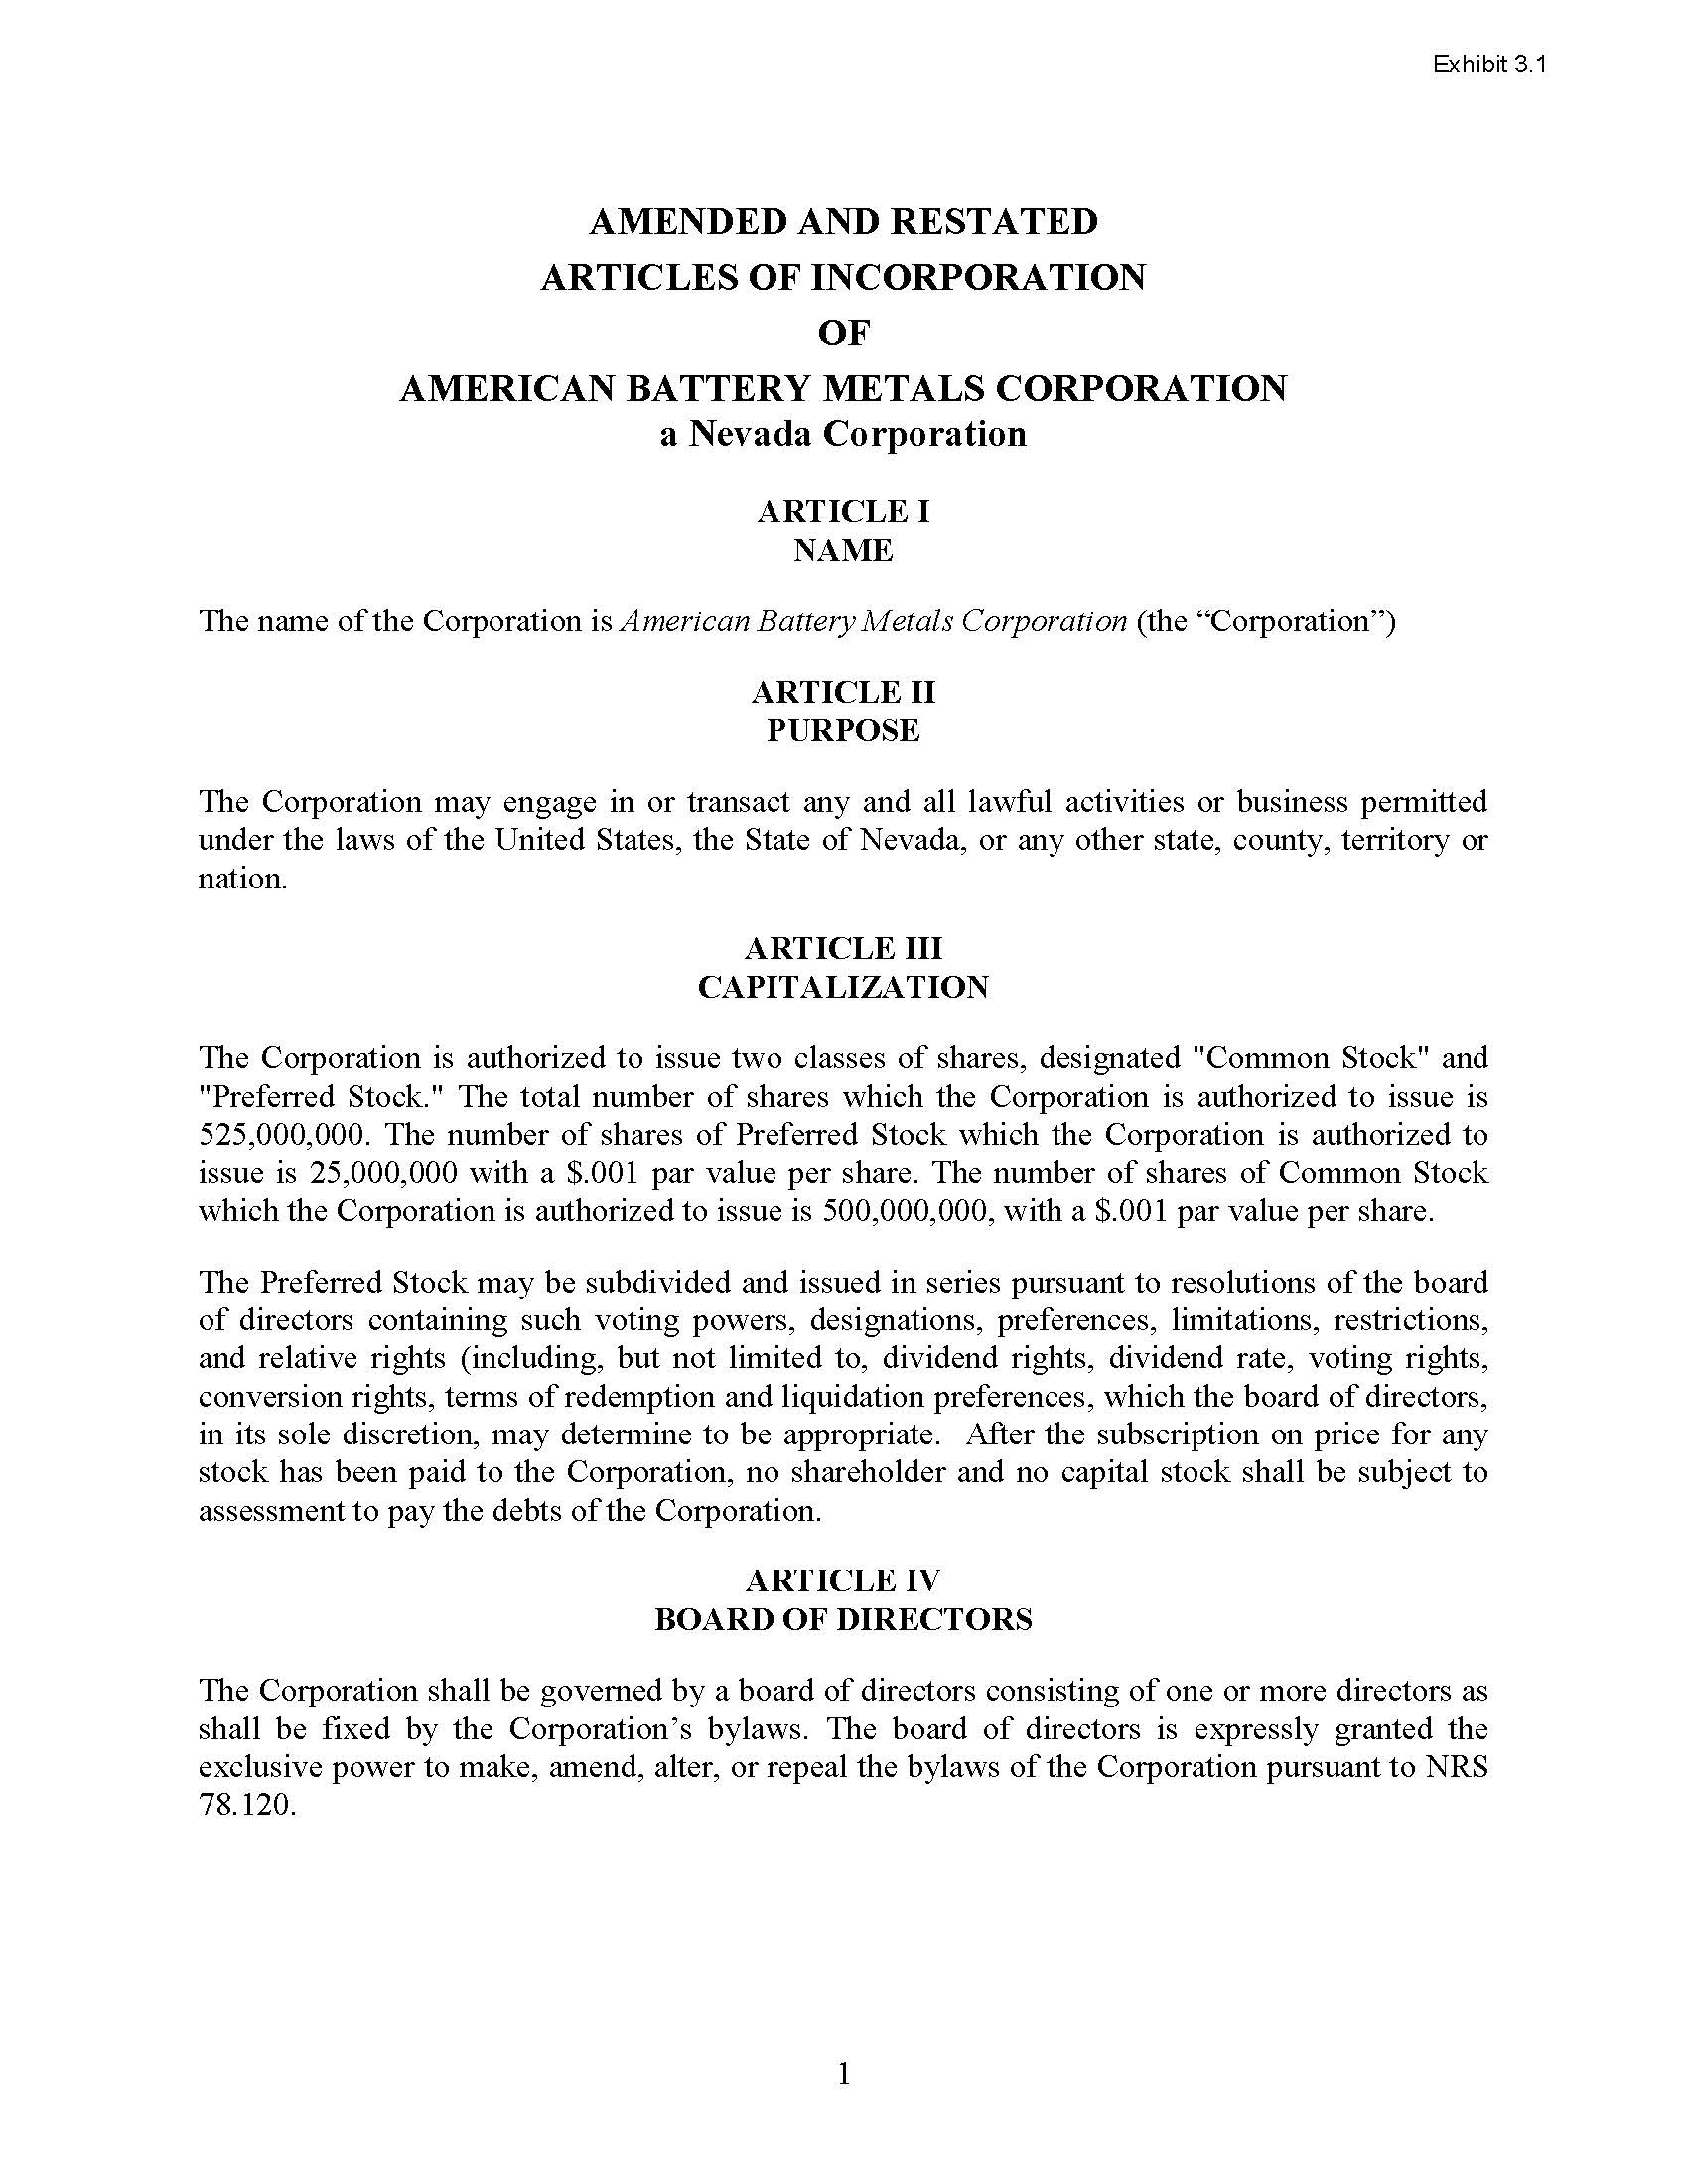 Exhibit 3.1 - 9-30-19 10K - ABML - Articles of Incorporation, as amended_Page_1.jpg